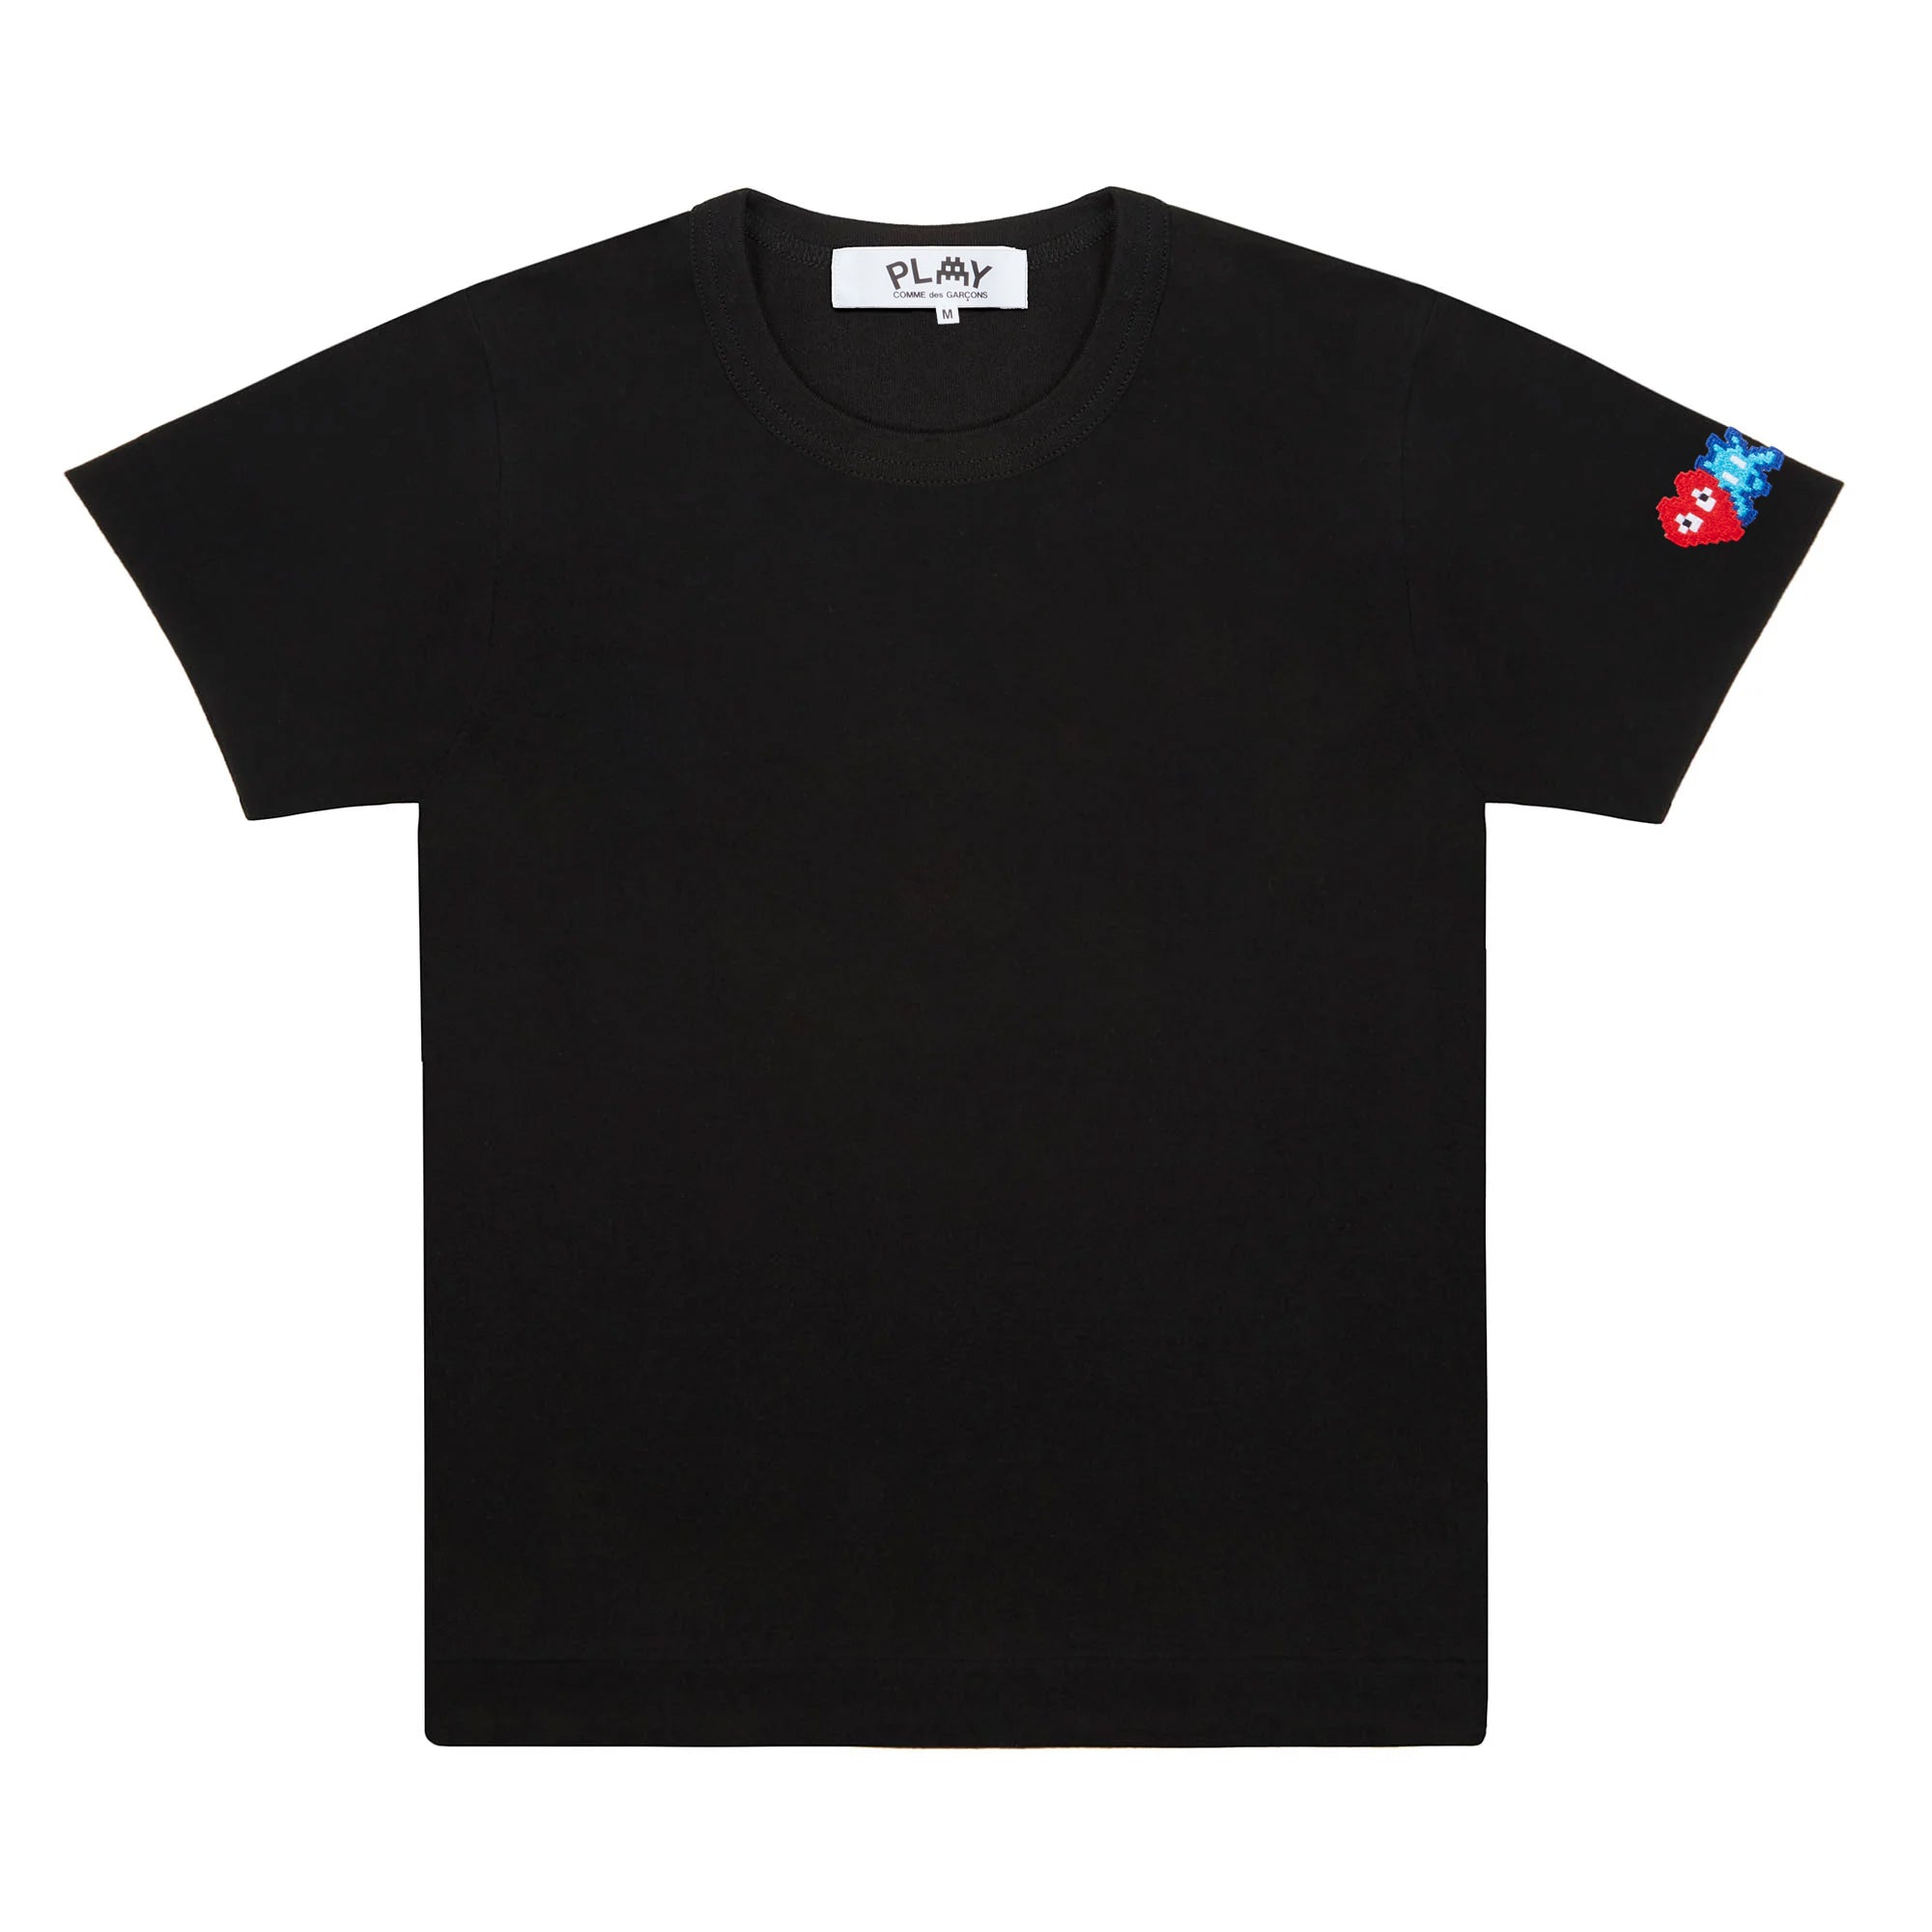 PLAY Invader T-Shirt Red and Blue Sleeve Emblem (Black)